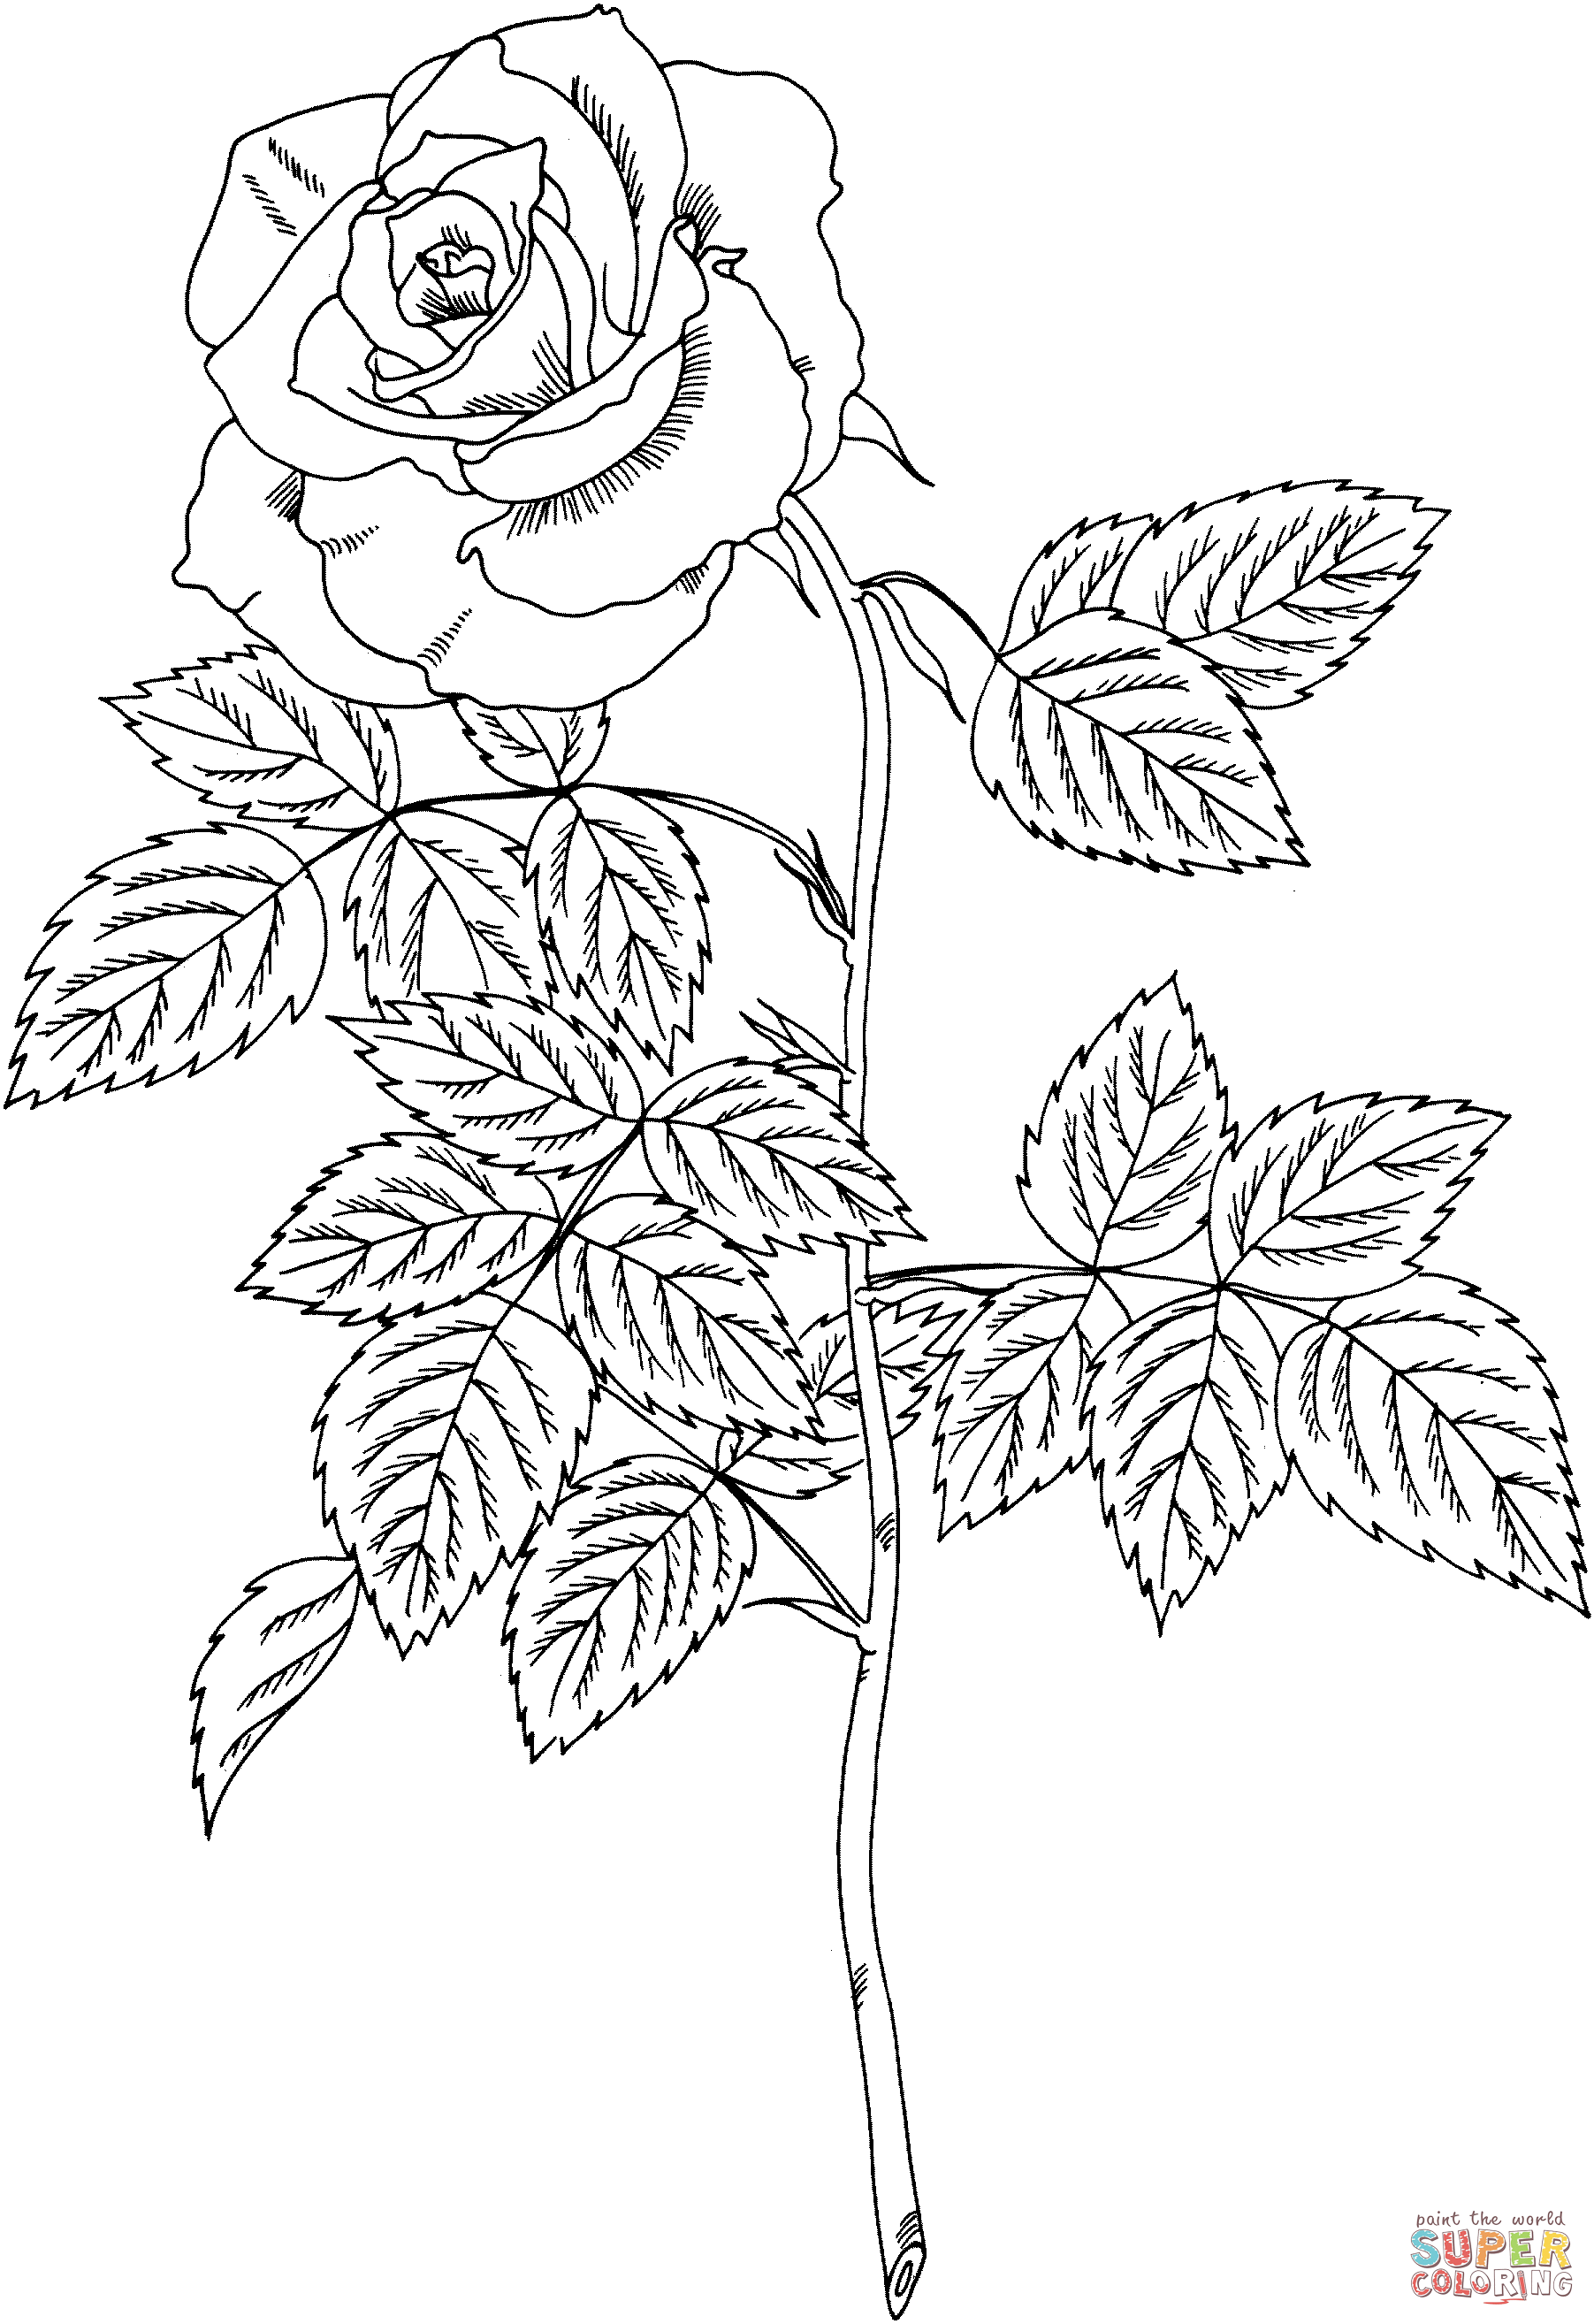 Brandy hybrid tea rose coloring page free printable coloring pages